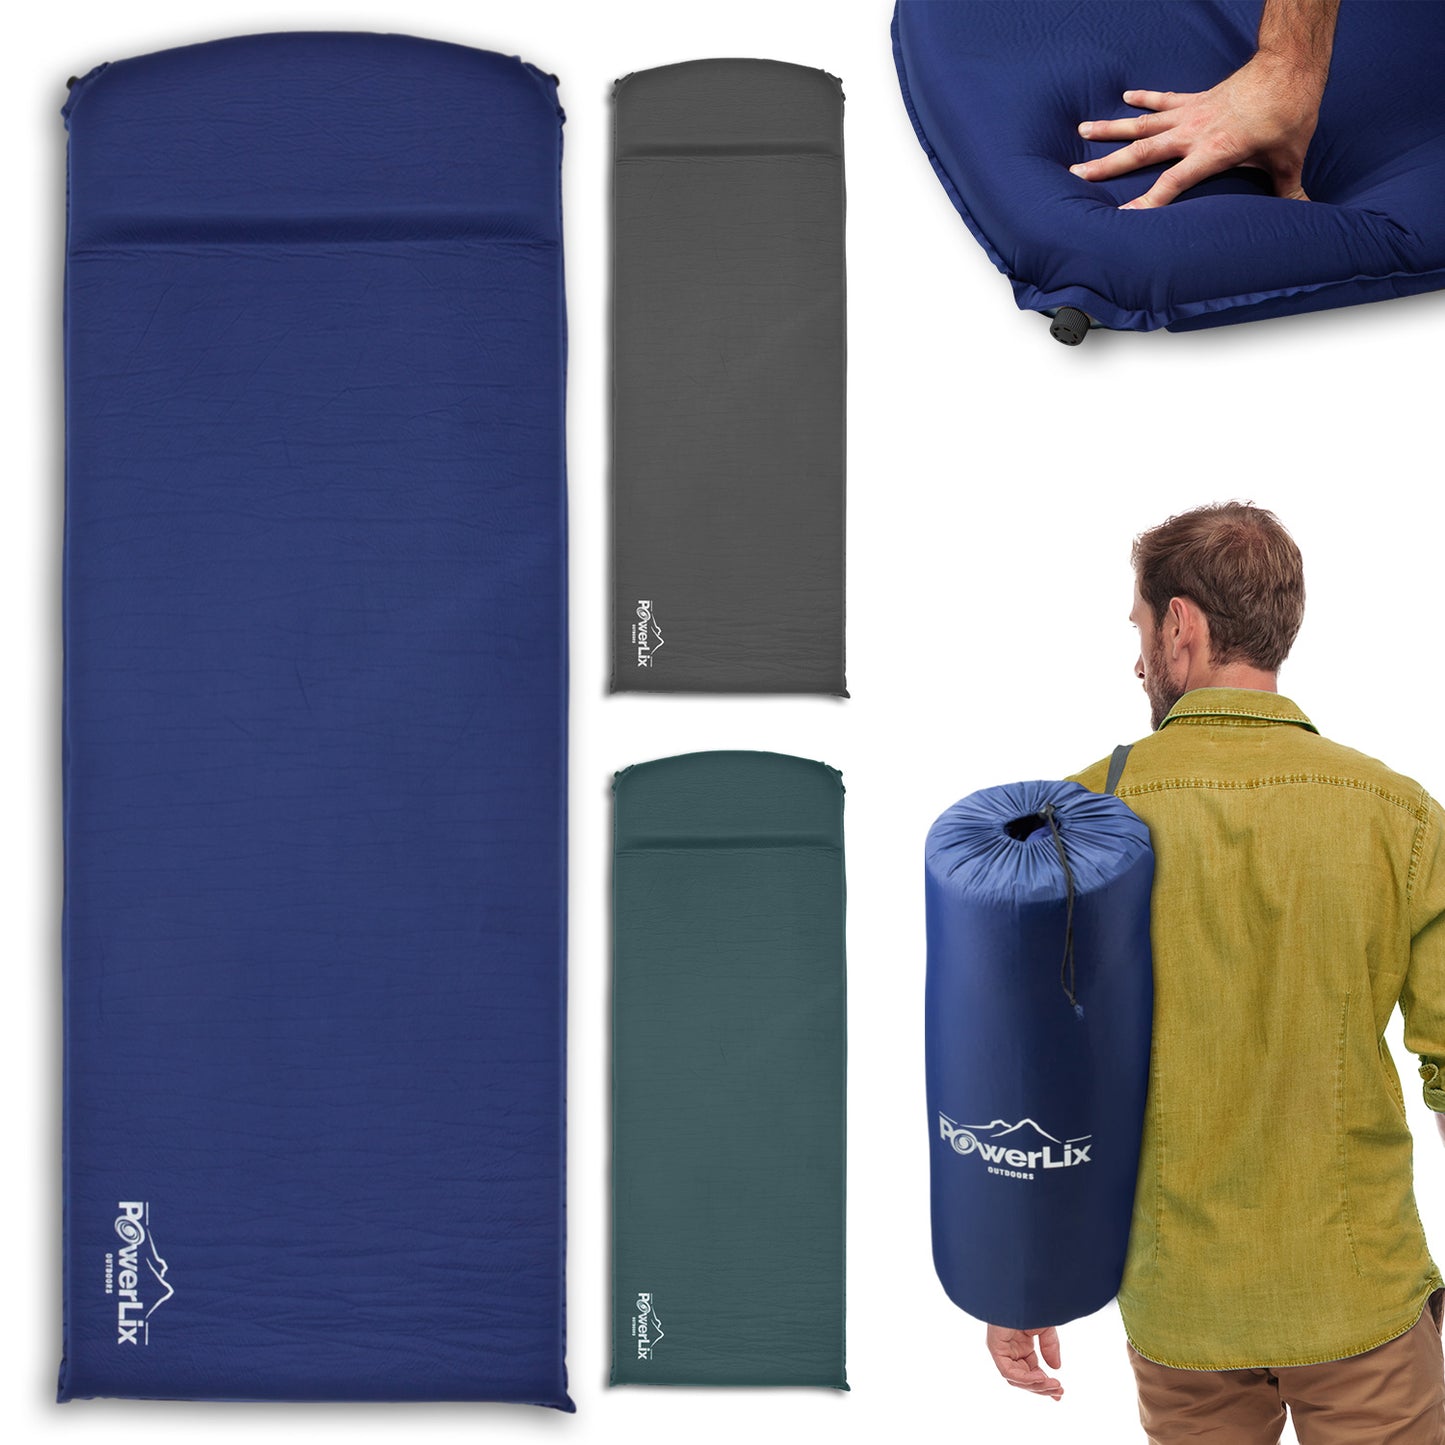 Three Powerlis Sleeping Pads with Self-Inflating Foam Pads displayed in blue, gray, and sea green.. A model shwoign one stored in its bad and hung over his shoulder. Another is shown being pressed on by a hand to demonstrate softness.